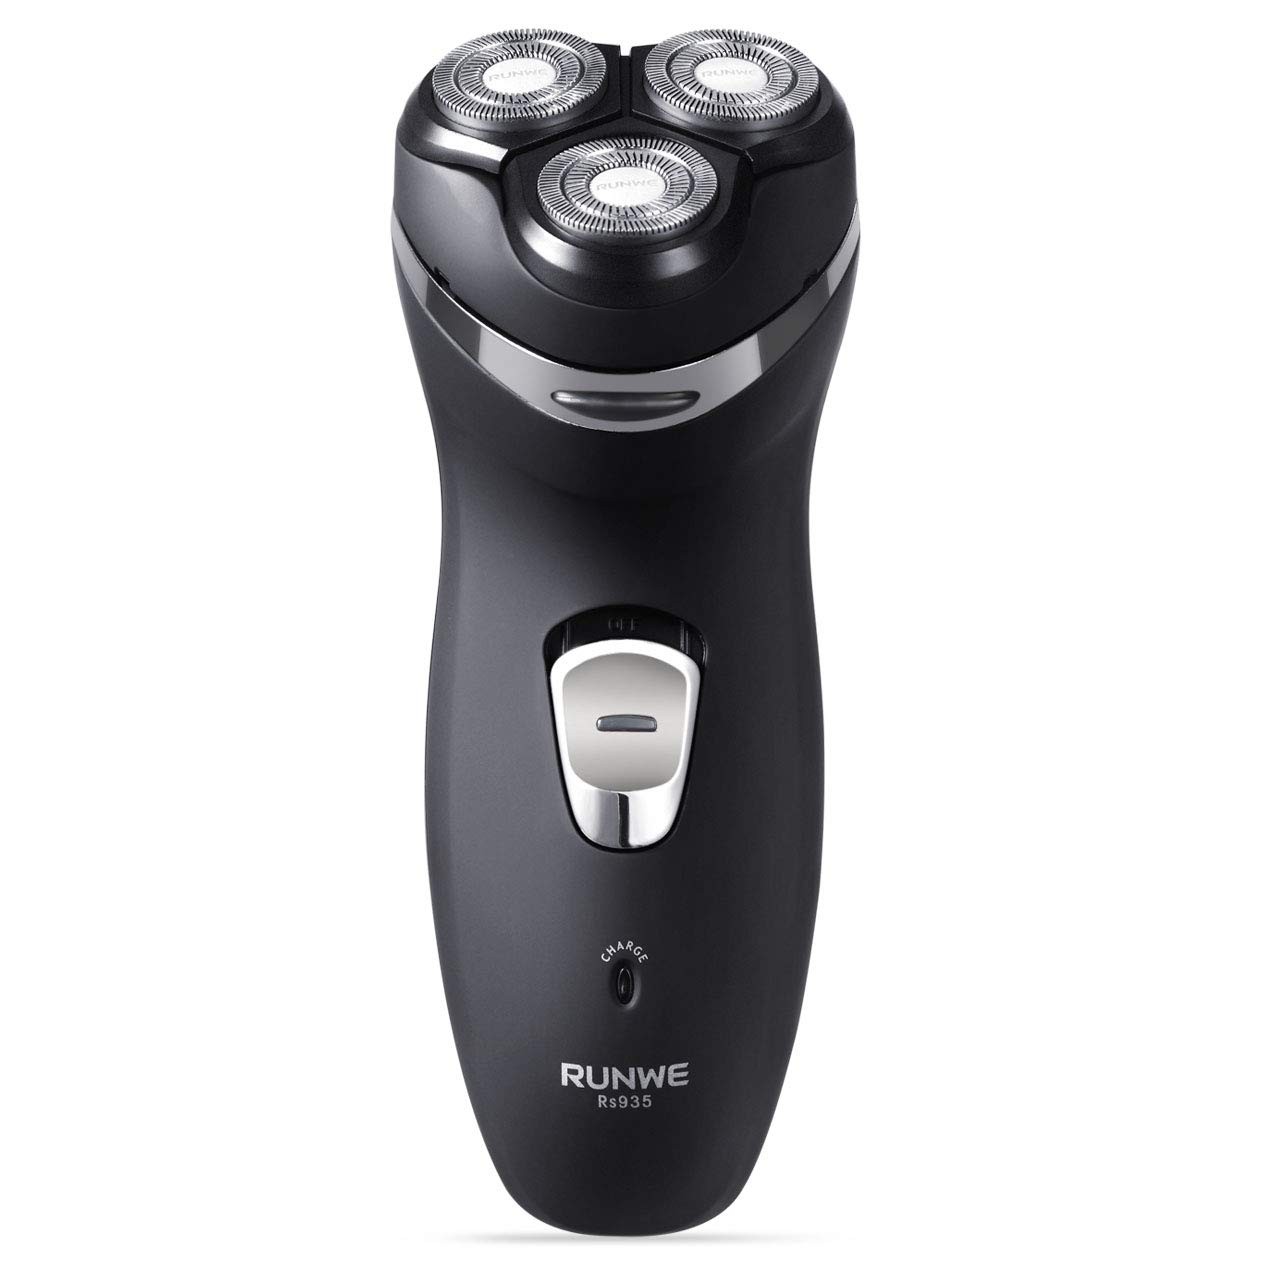 RUNWE MuteShave Electric Razor, Men's Cordless Rechargeable Rotary Shaver with Pop-Up Beard trimmer